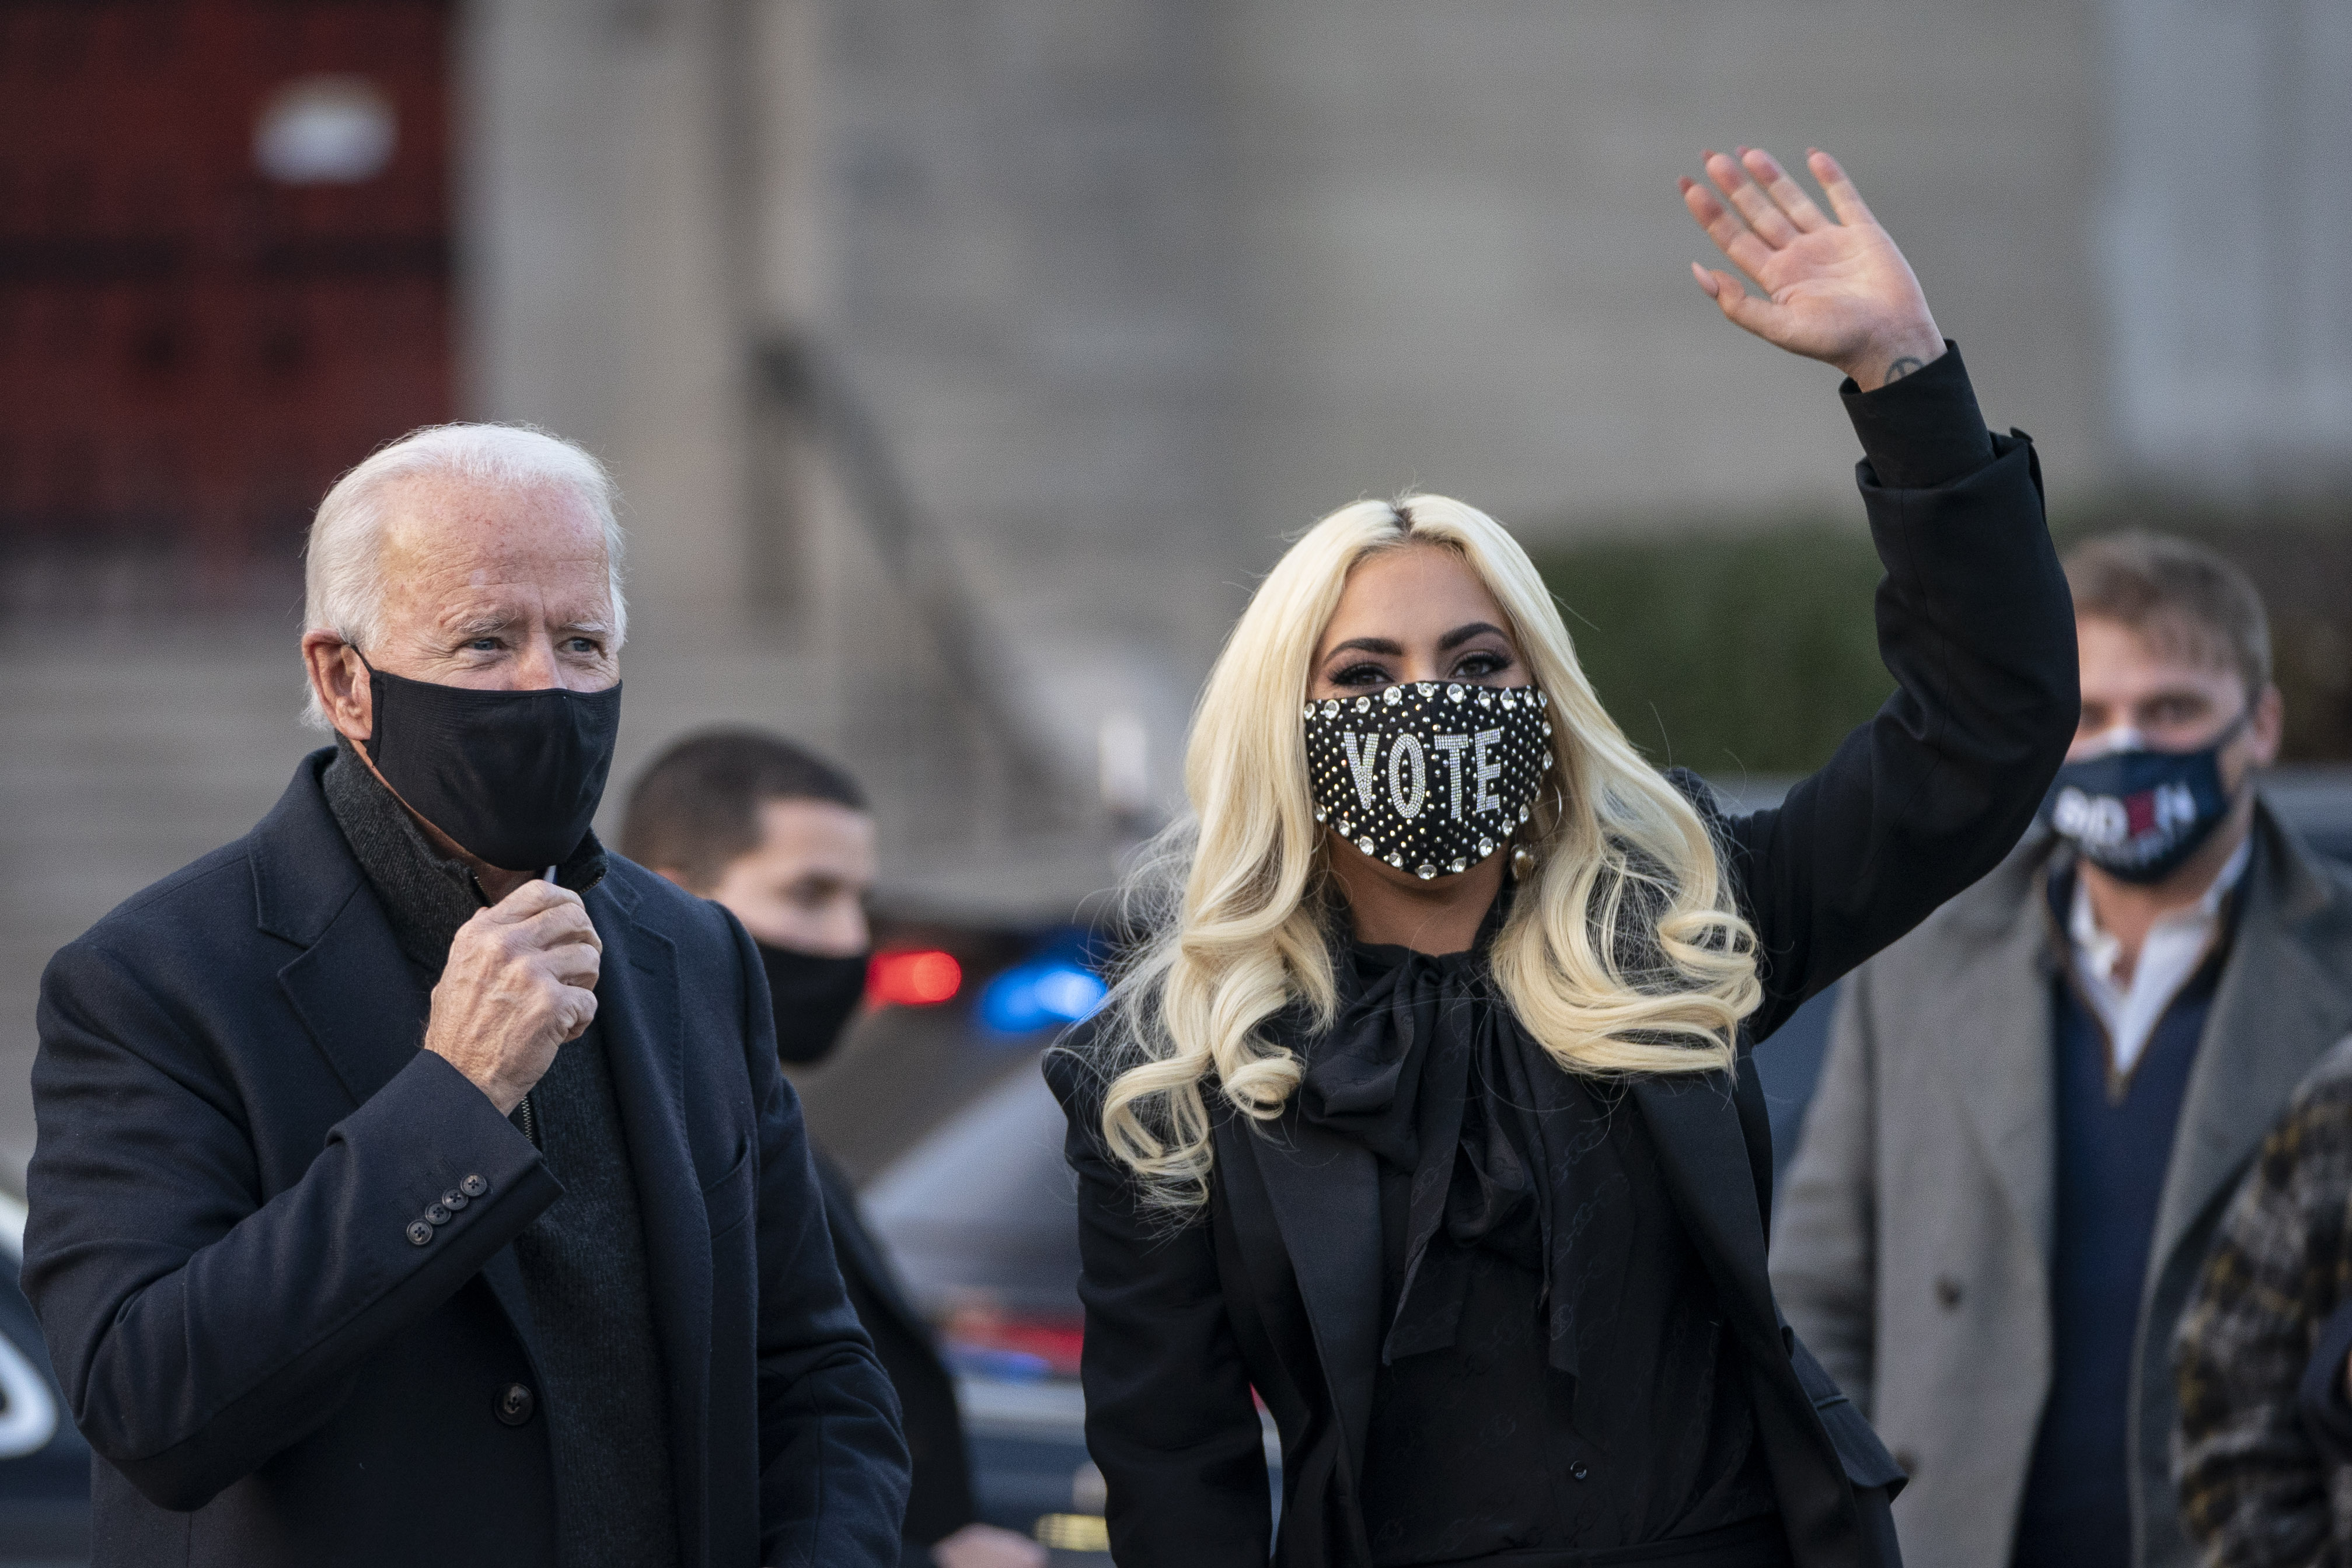 Democratic presidential nominee Joe Biden and Lady Gaga greet college students at Schenley Park on November 2, 2020, in Pittsburgh, Pennsylvania.